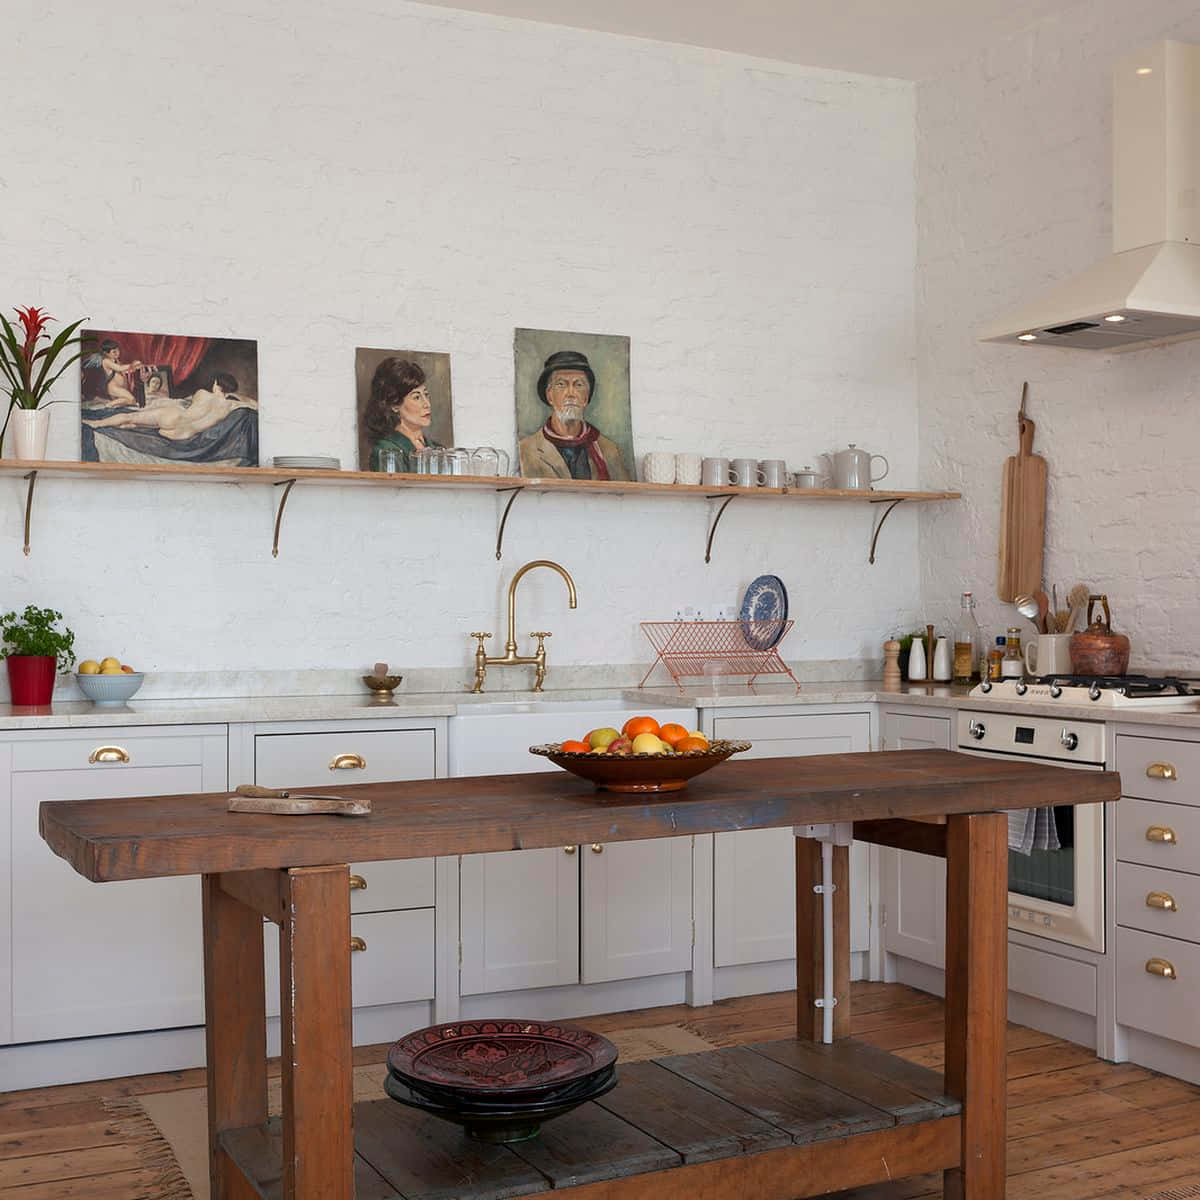 A Kitchen With A Wooden Table And A Stove